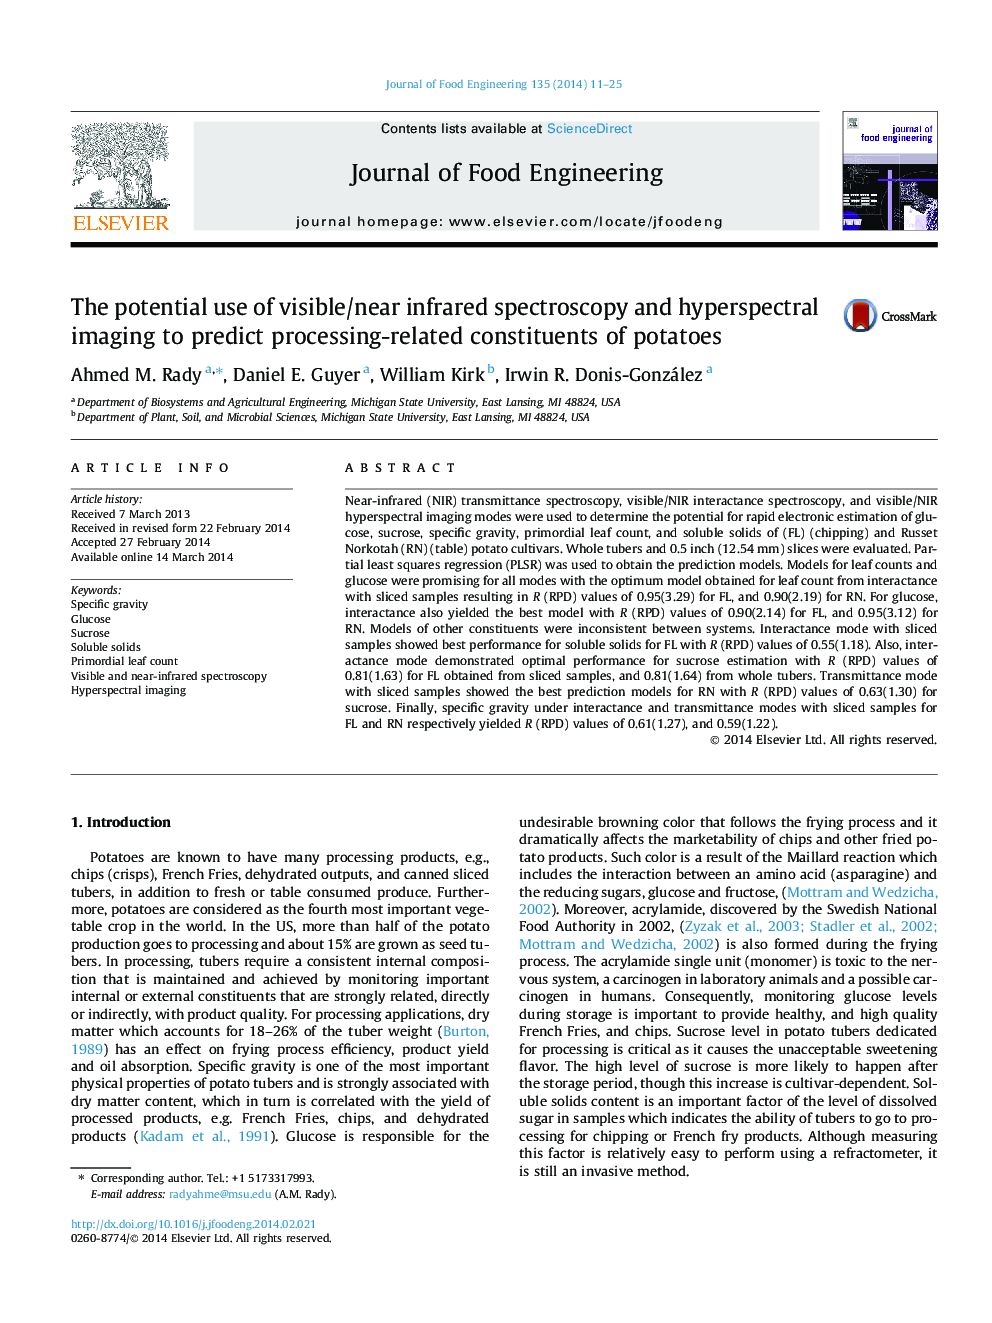 The potential use of visible/near infrared spectroscopy and hyperspectral imaging to predict processing-related constituents of potatoes